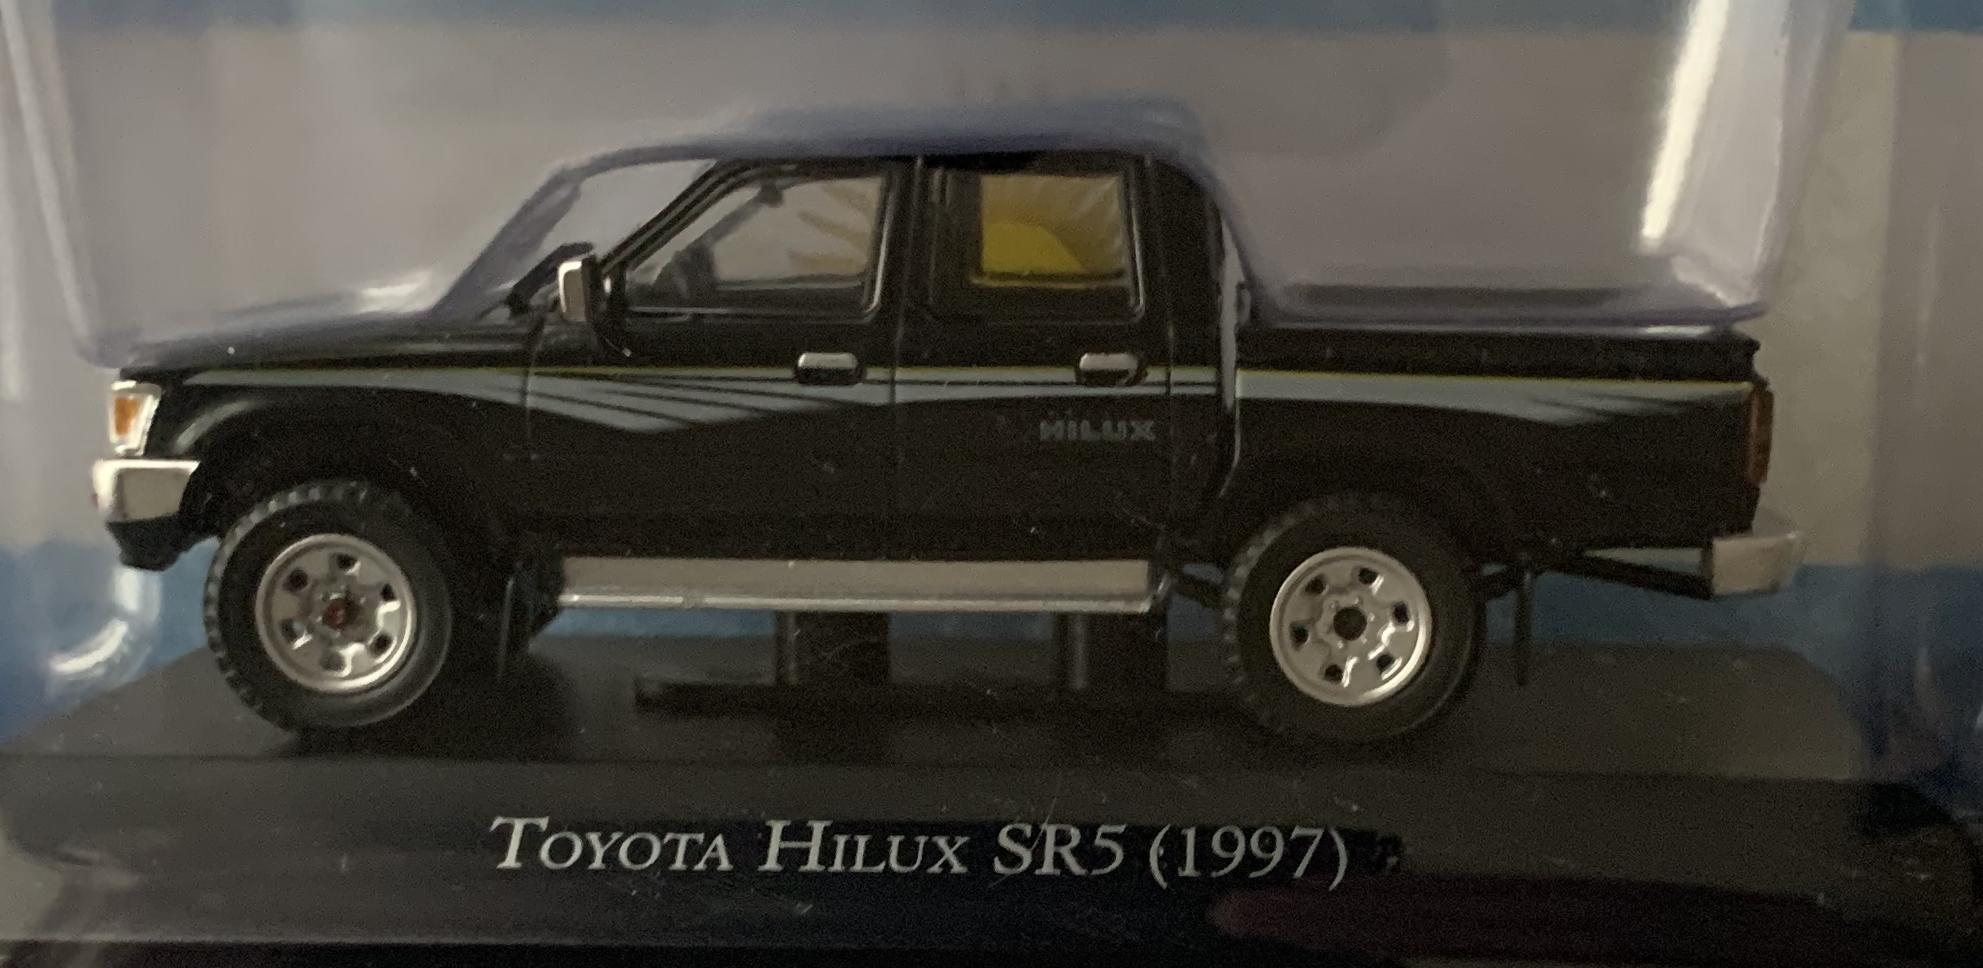 Toyota Hilux SR5 1997 in black 1:43 scale model from 80/90’s collection